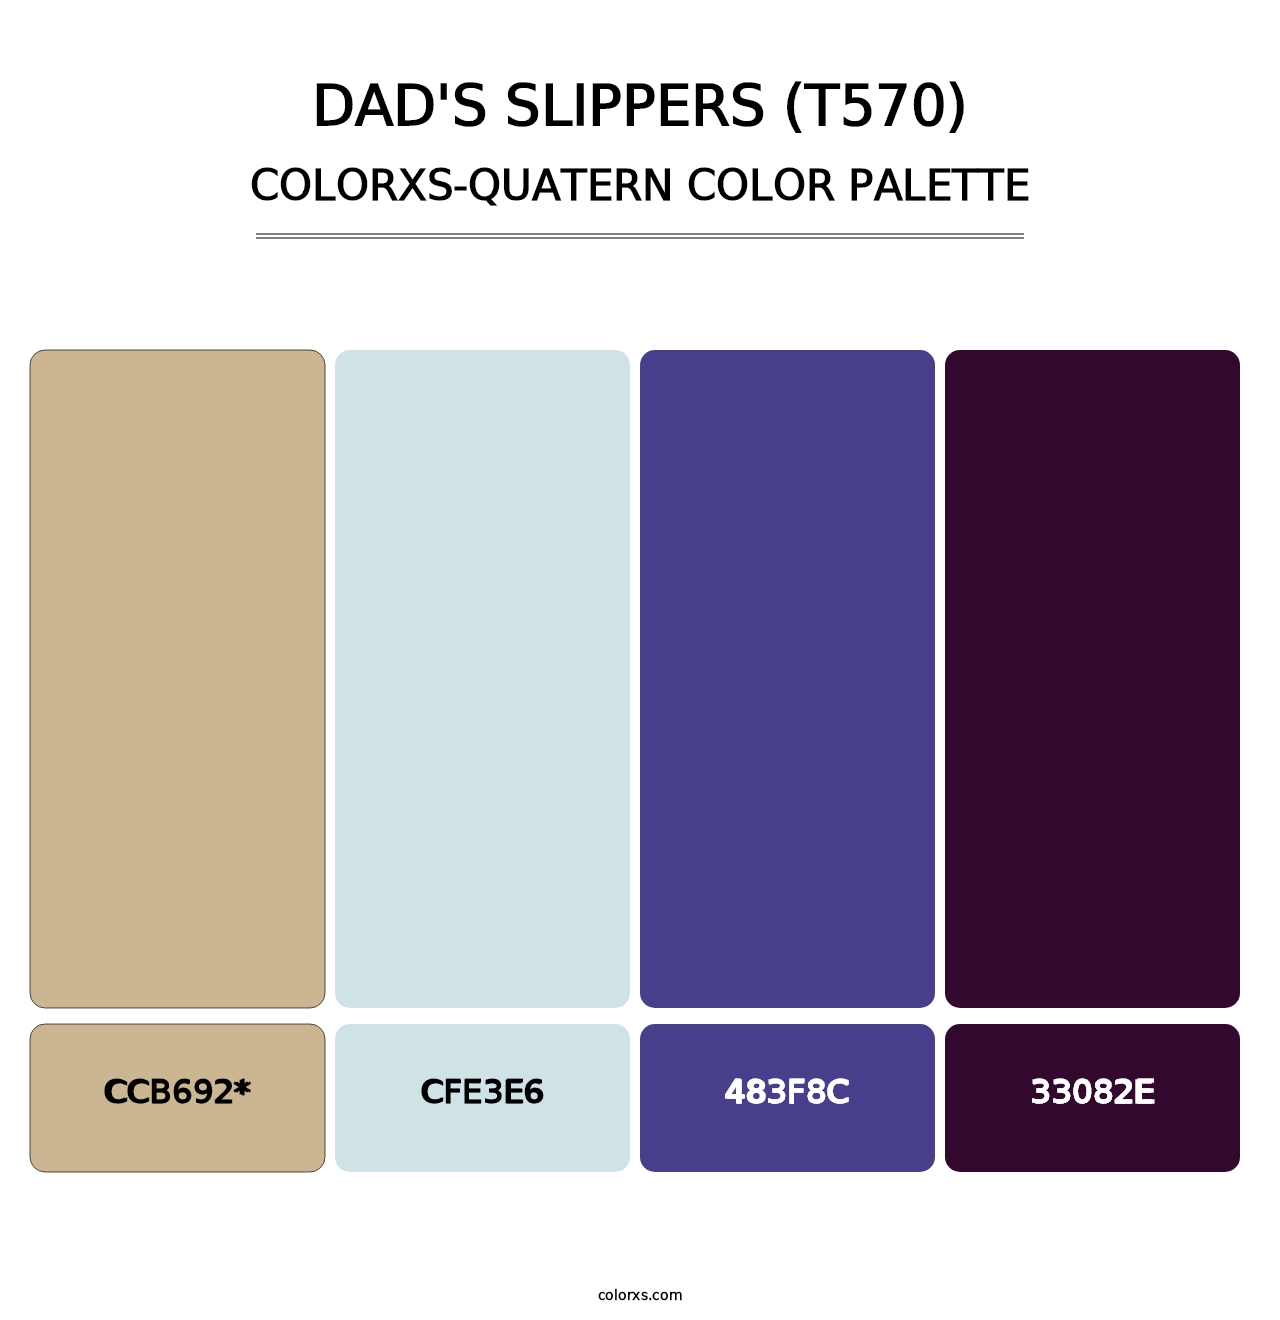 Dad's Slippers (T570) - Colorxs Quatern Palette